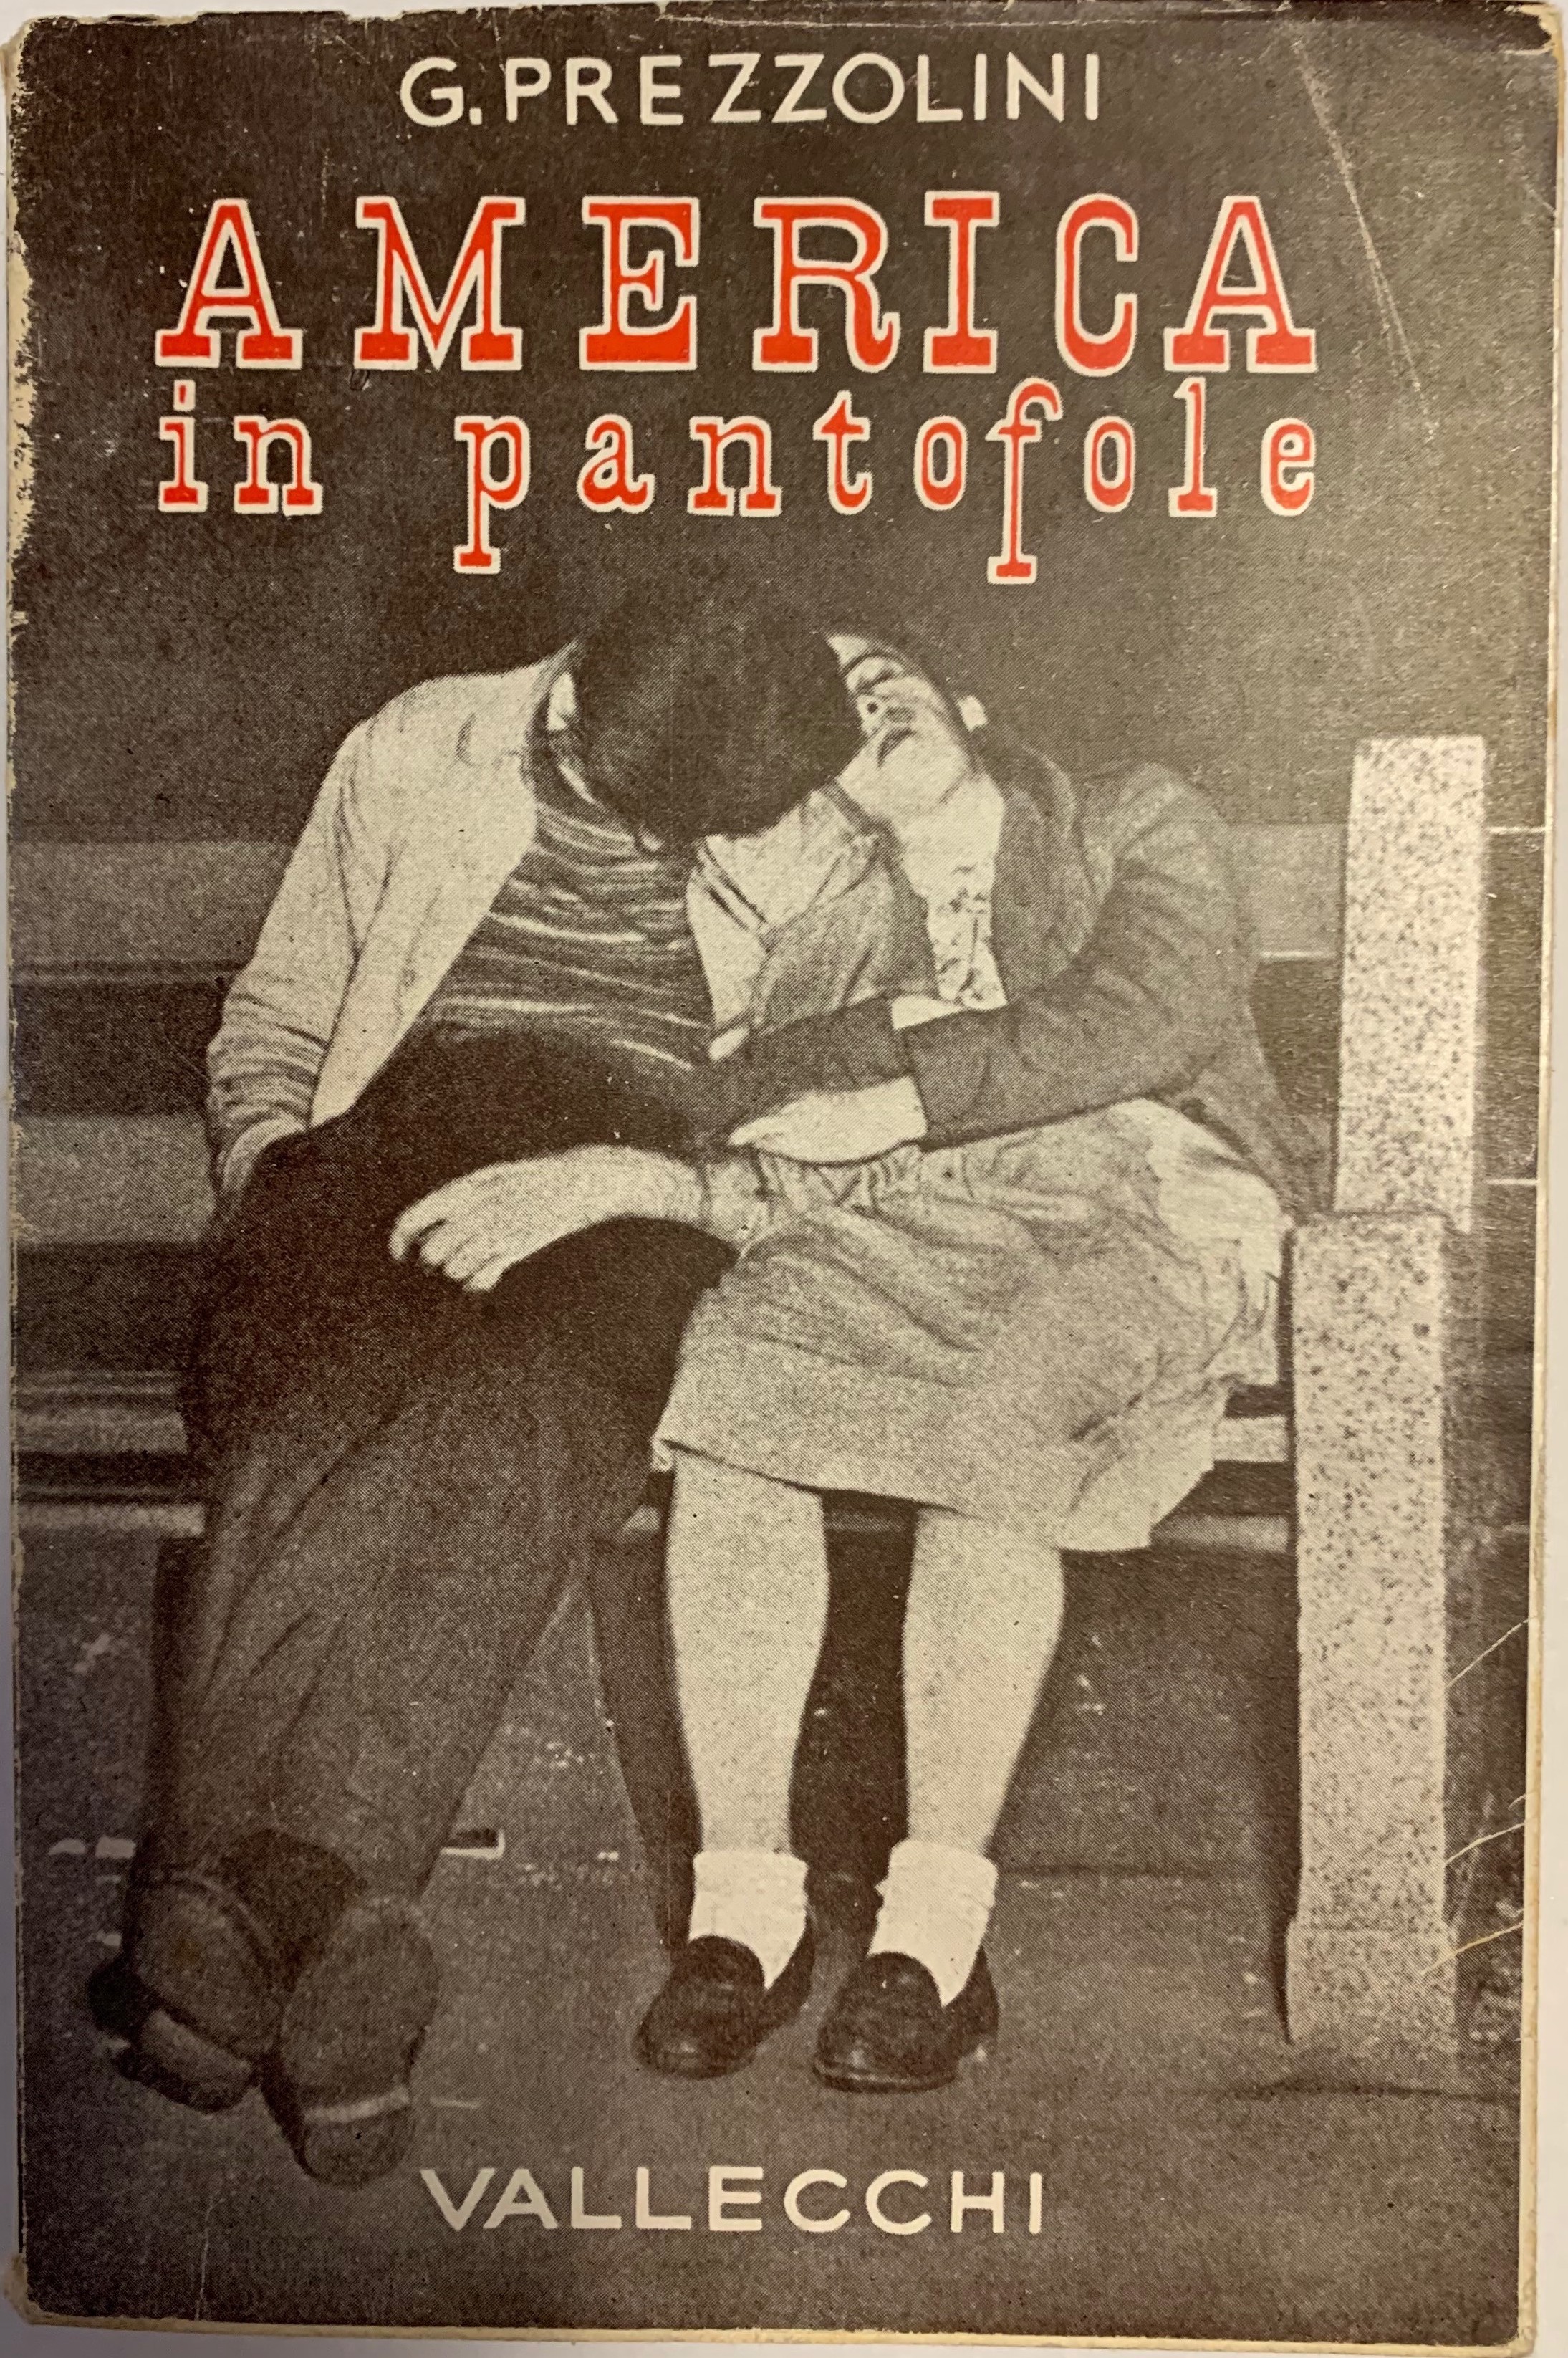 America in pantofole [America in Slippers] (Vallecchi, 1950)